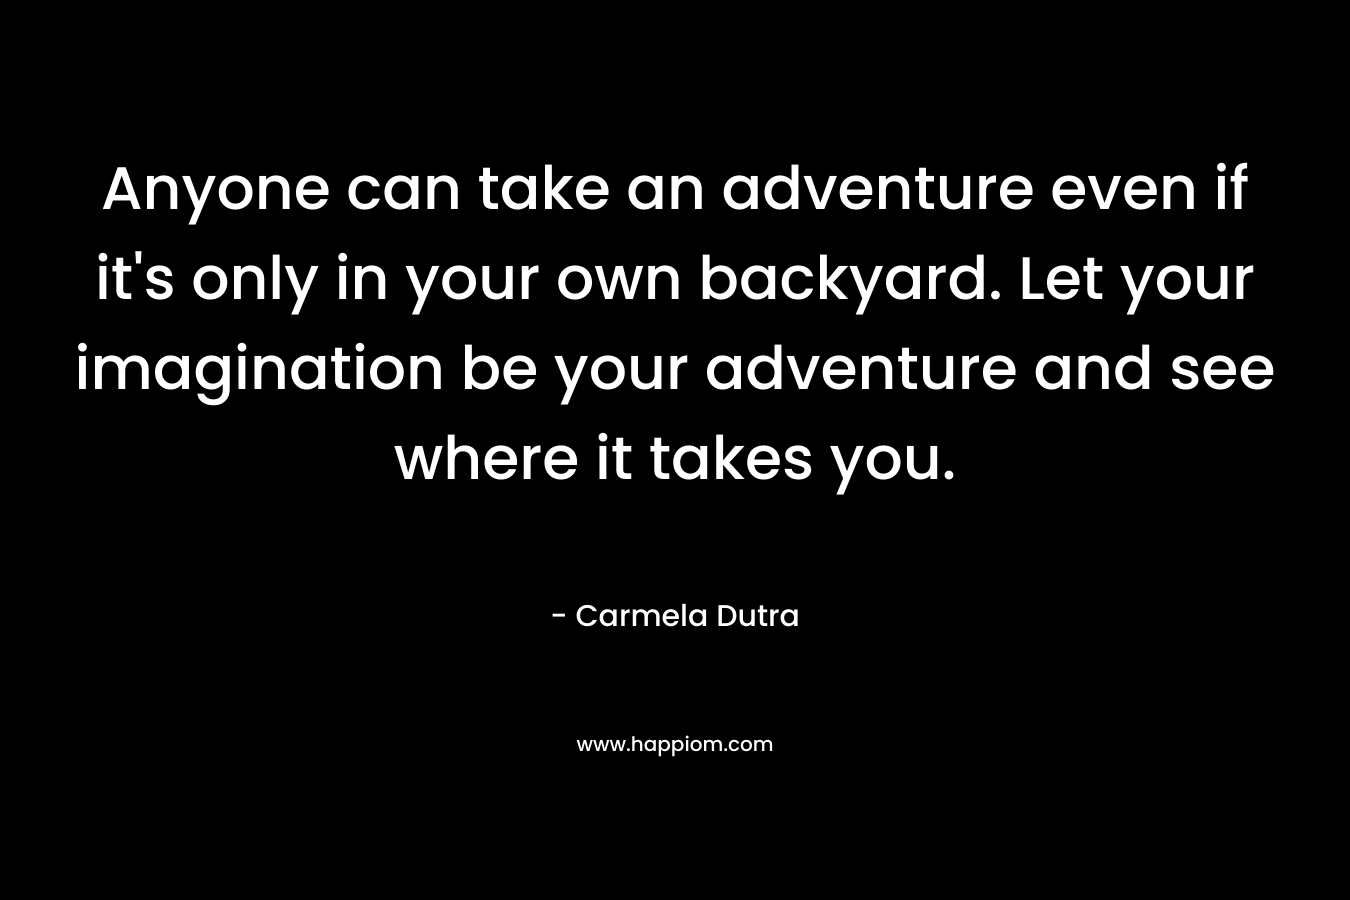 Anyone can take an adventure even if it’s only in your own backyard. Let your imagination be your adventure and see where it takes you. – Carmela Dutra